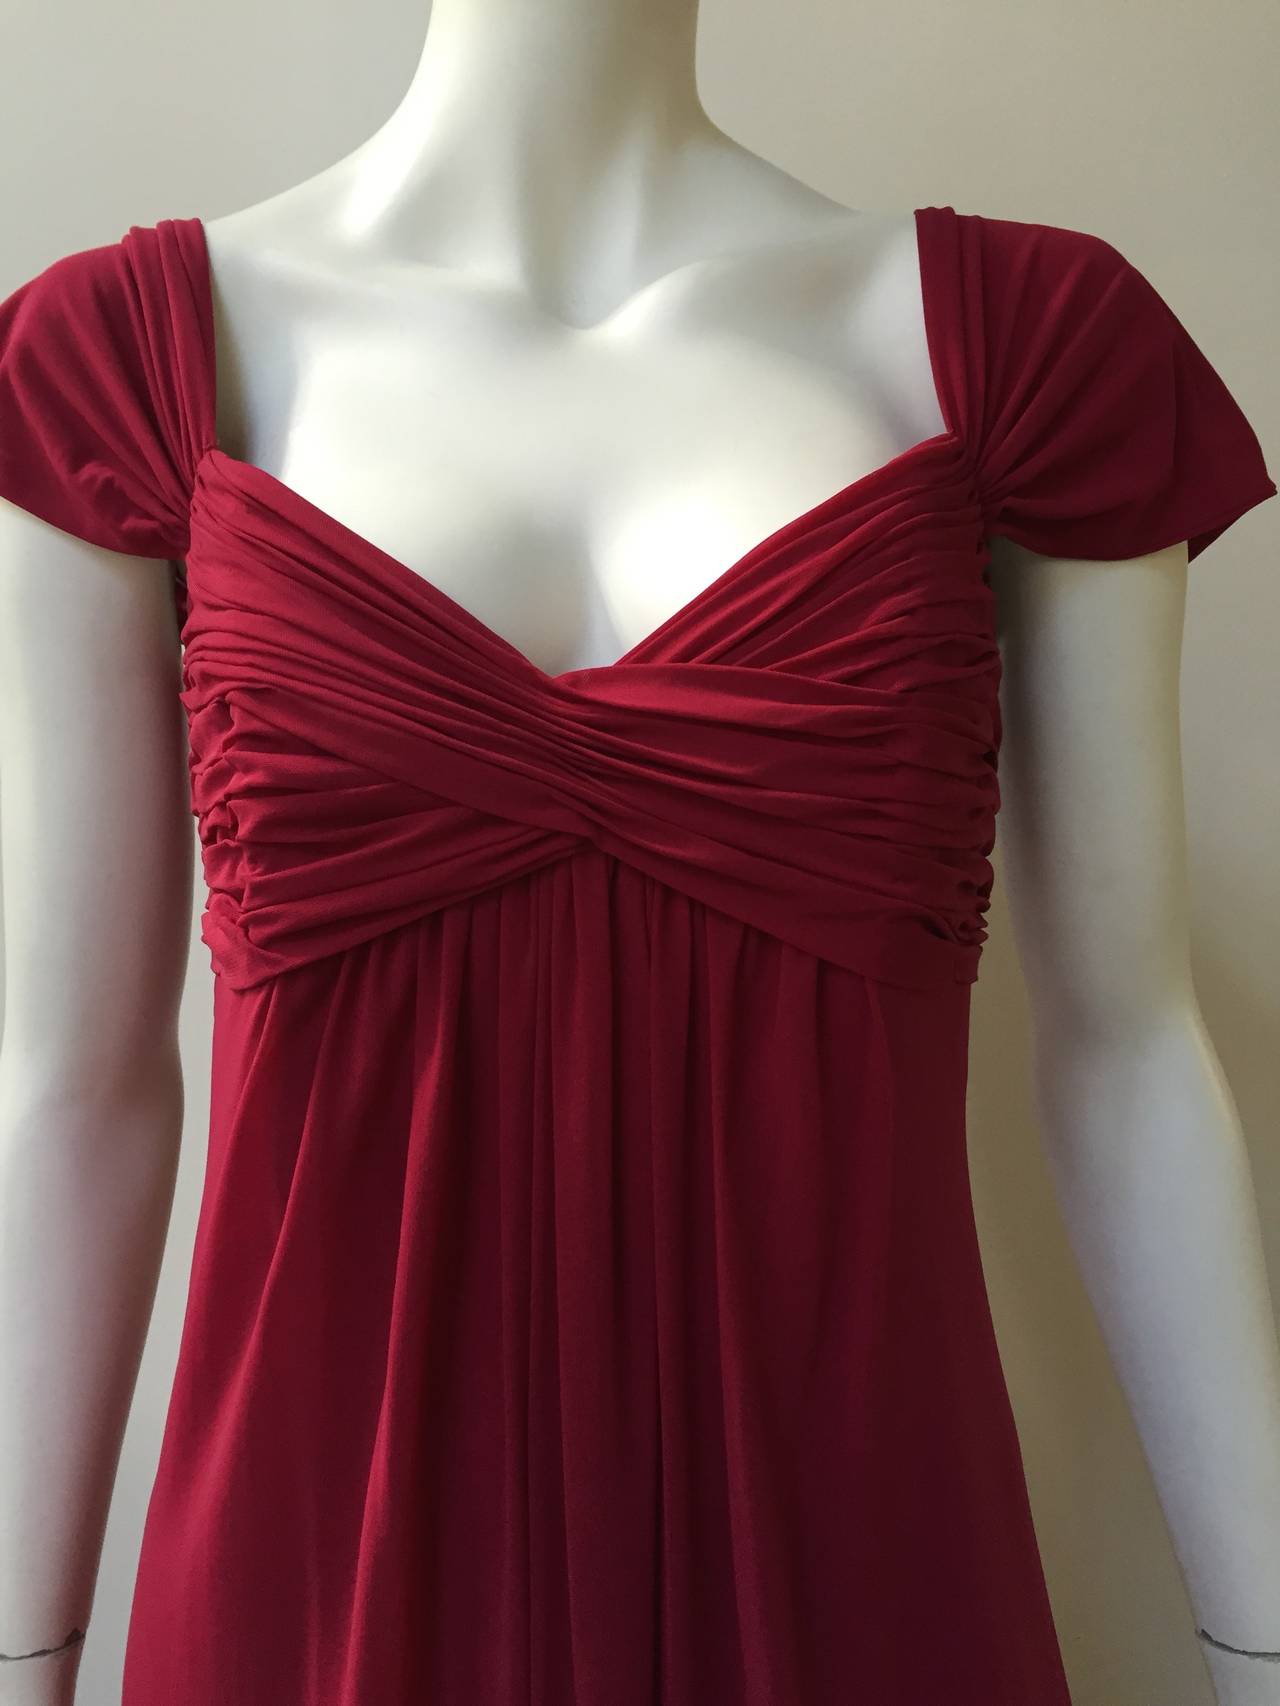 Red Vicky Tiel Couture Paris Silk Burgundy Evening Gown Size 6/8. For Sale